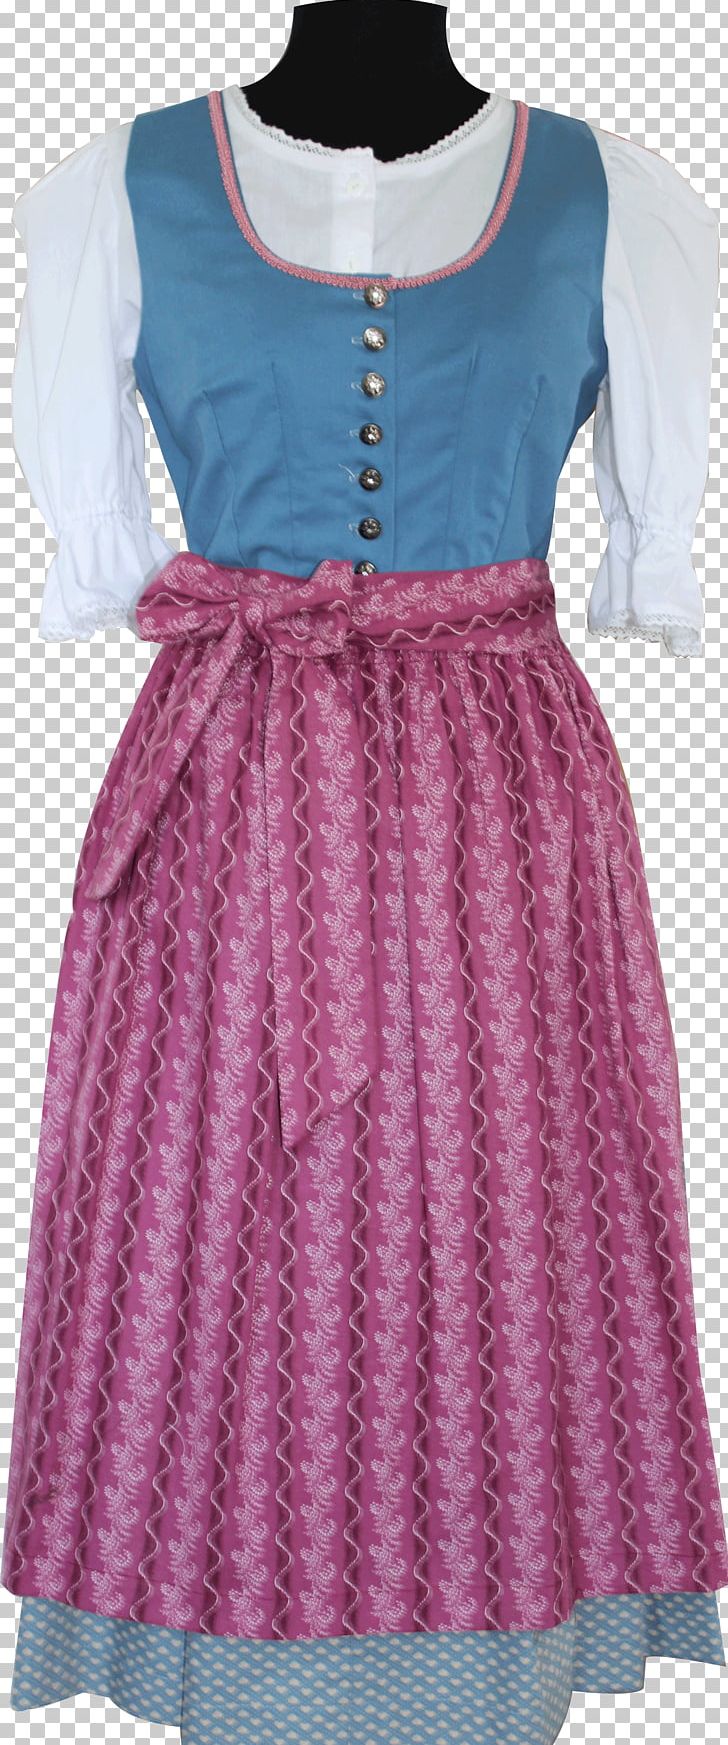 Dress Sleeve Blouse Clothing Pink M PNG, Clipart, Blouse, Clothing, Day Dress, Dirndl, Dress Free PNG Download